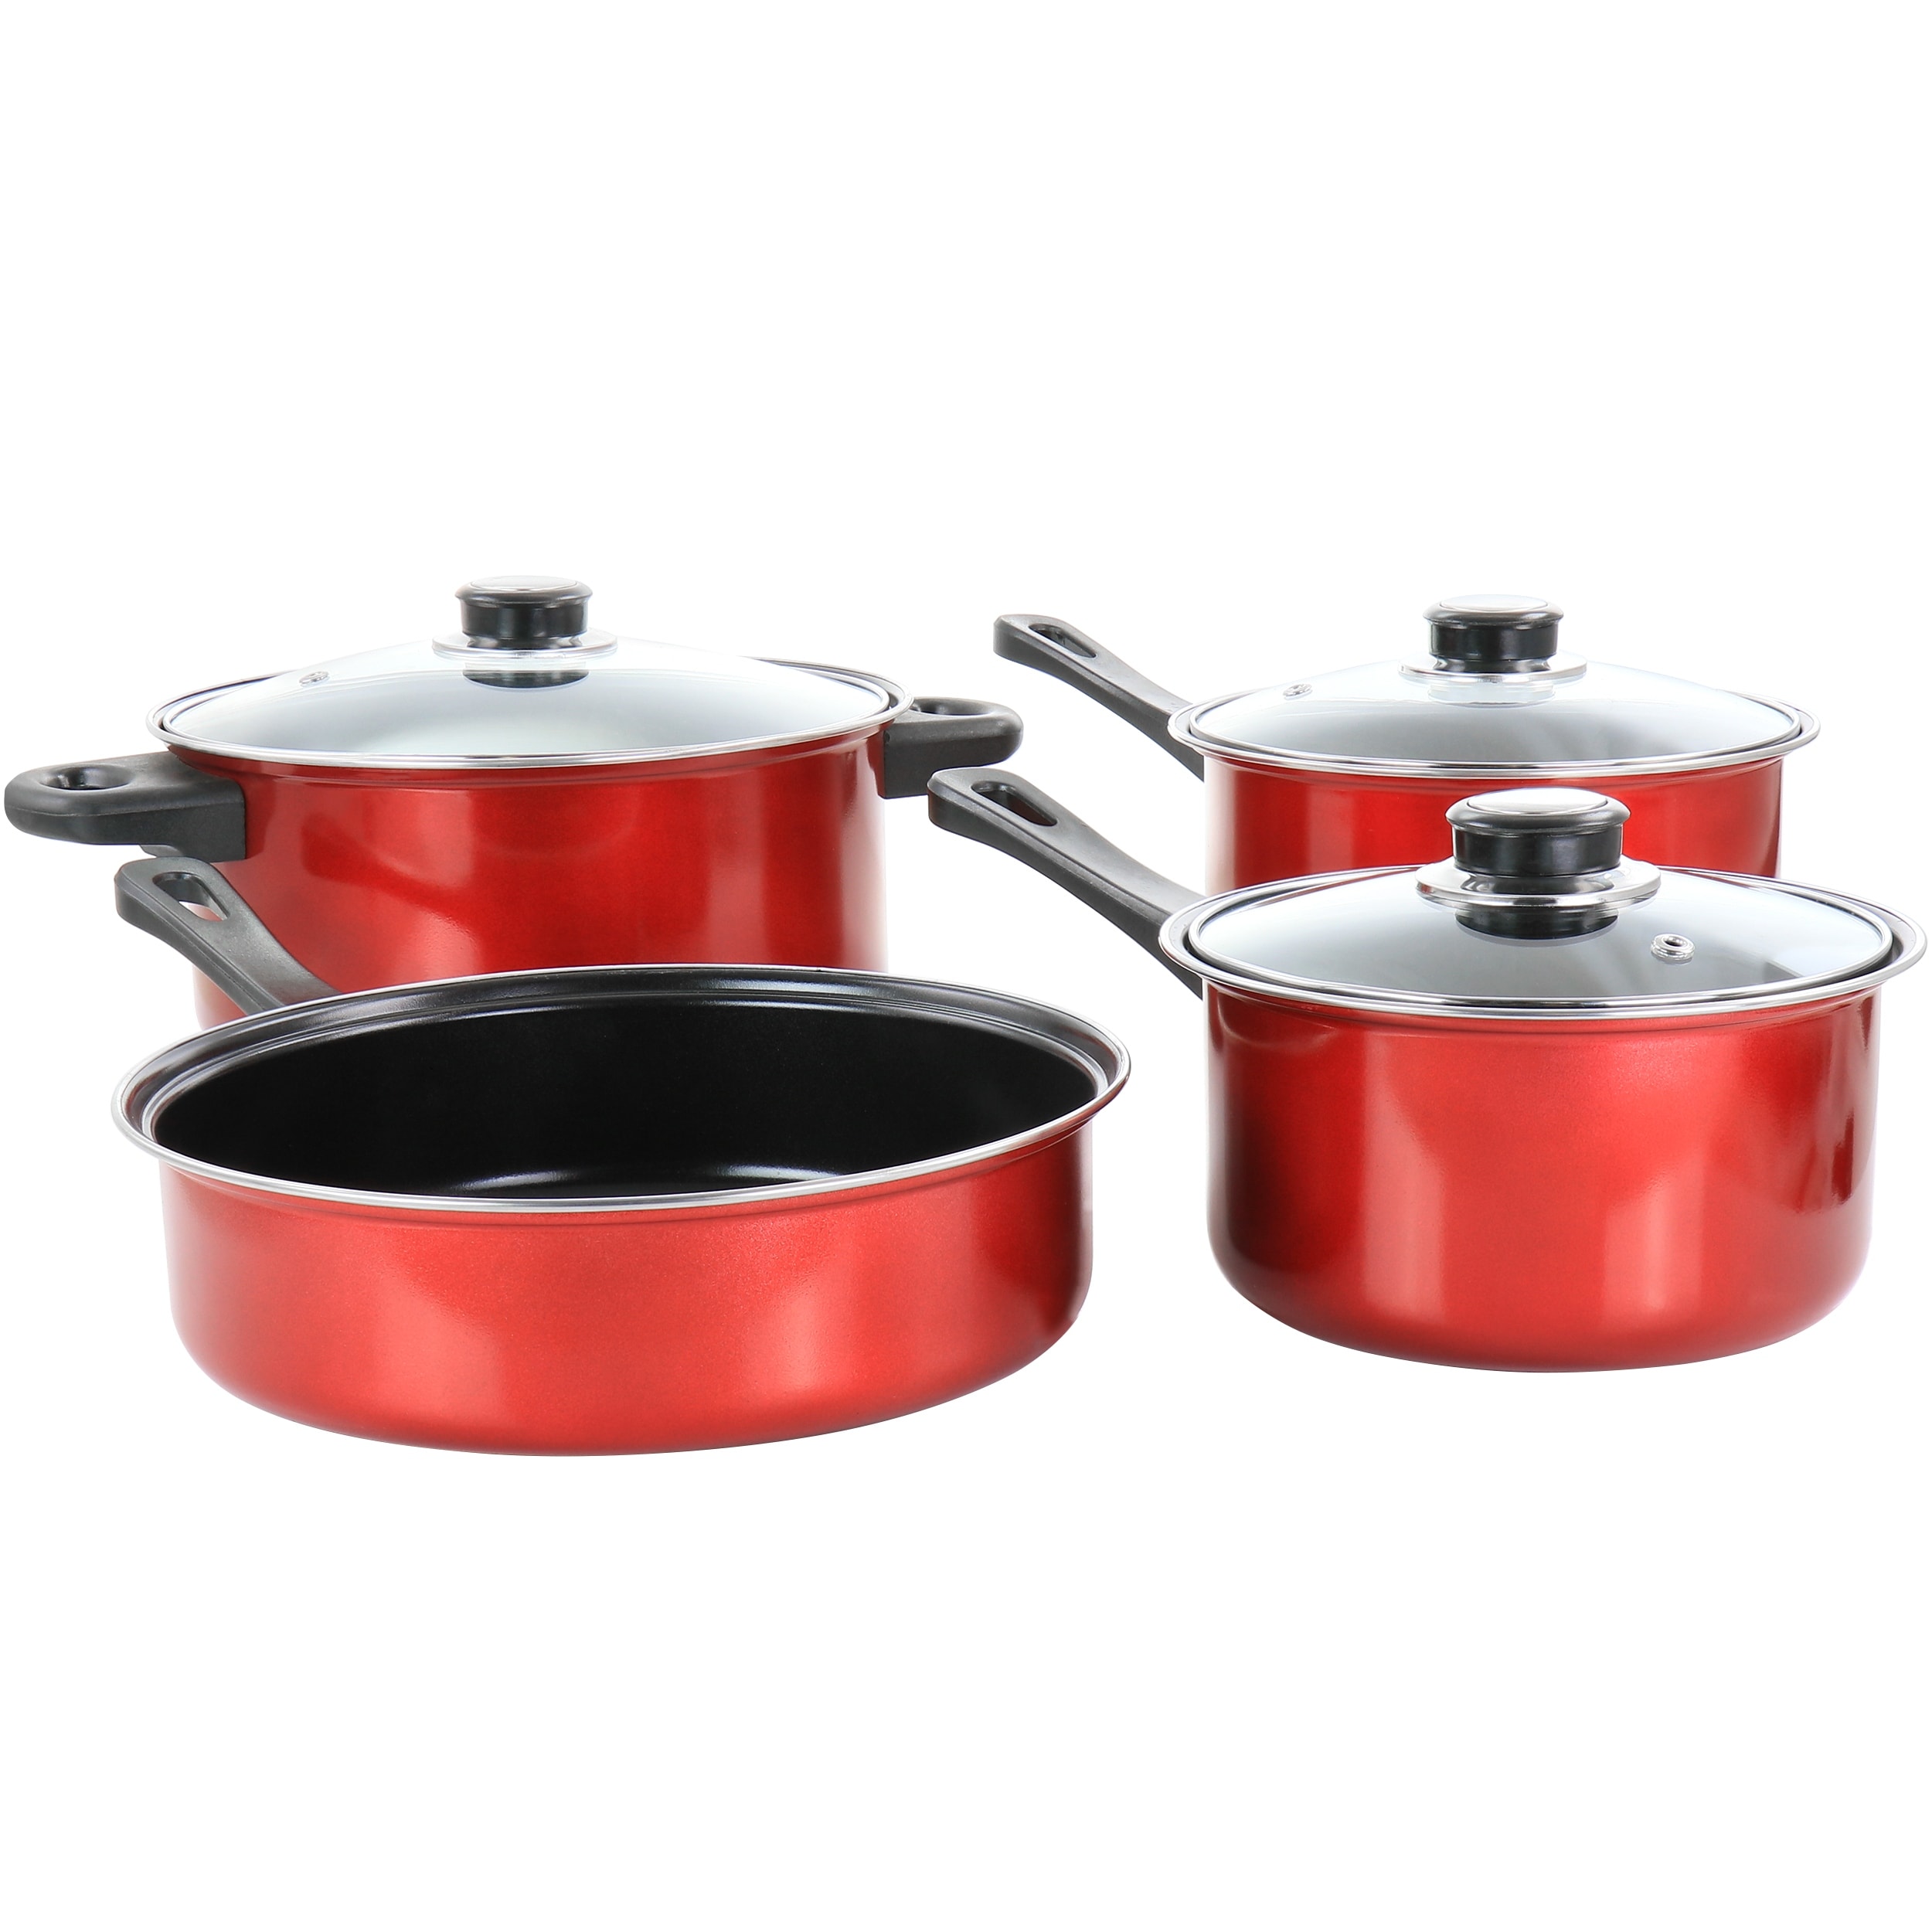 https://ak1.ostkcdn.com/images/products/is/images/direct/6c67beeef7d4c4bb4588d7bff12f0754f2d75019/7-Piece-Nonstick-Steel-Cookware-Set-in-Red.jpg